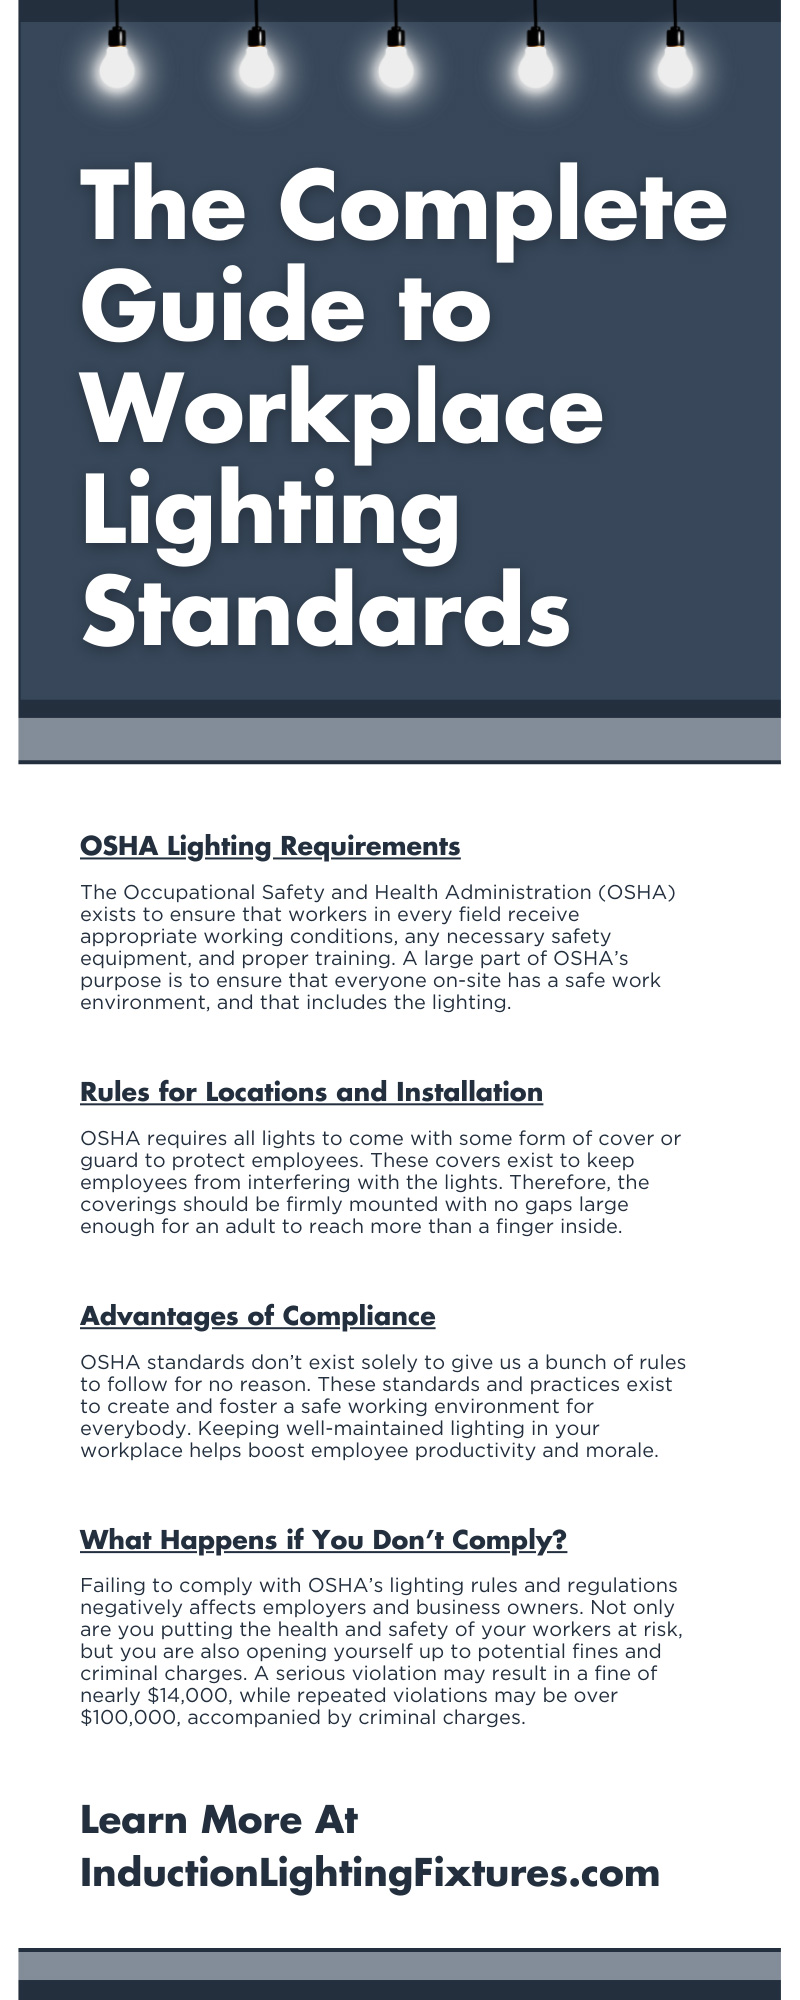 The Complete Guide to Workplace Lighting Standards